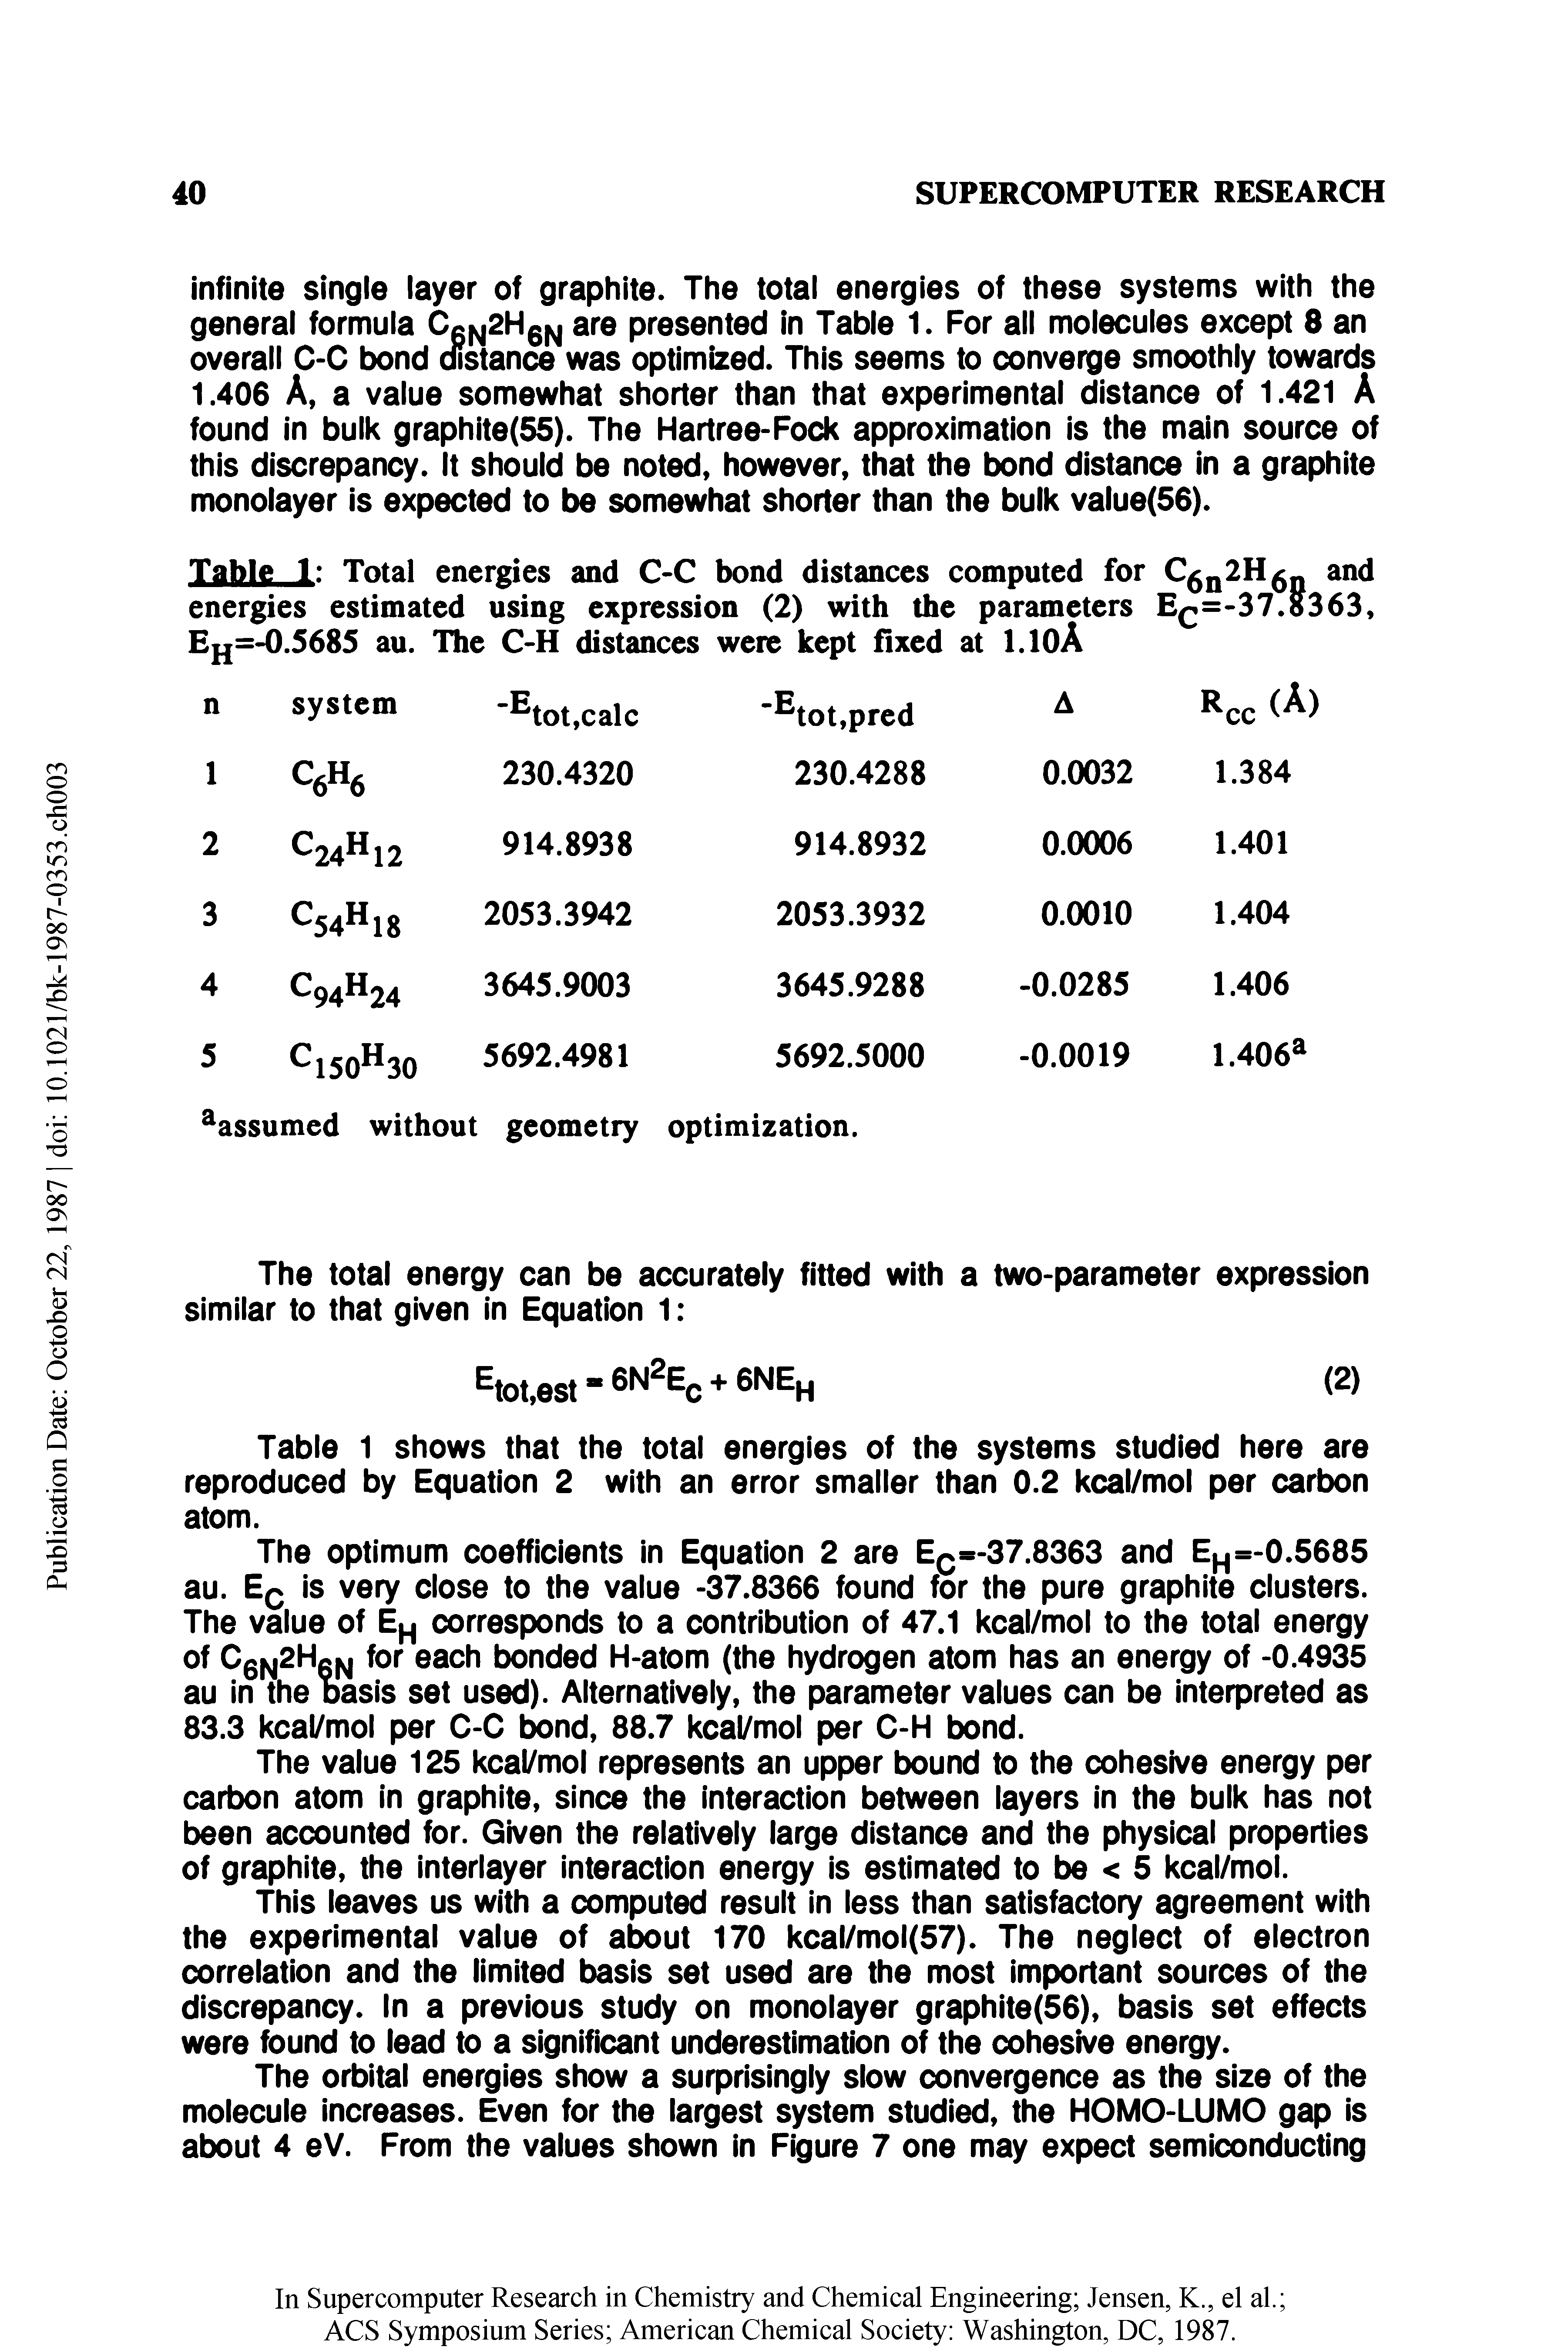 Table 1 Total energies and C-C bond distances computed for Cgjj2Hg- and energies estimated using expression (2) with the parameters =-37.8363,...